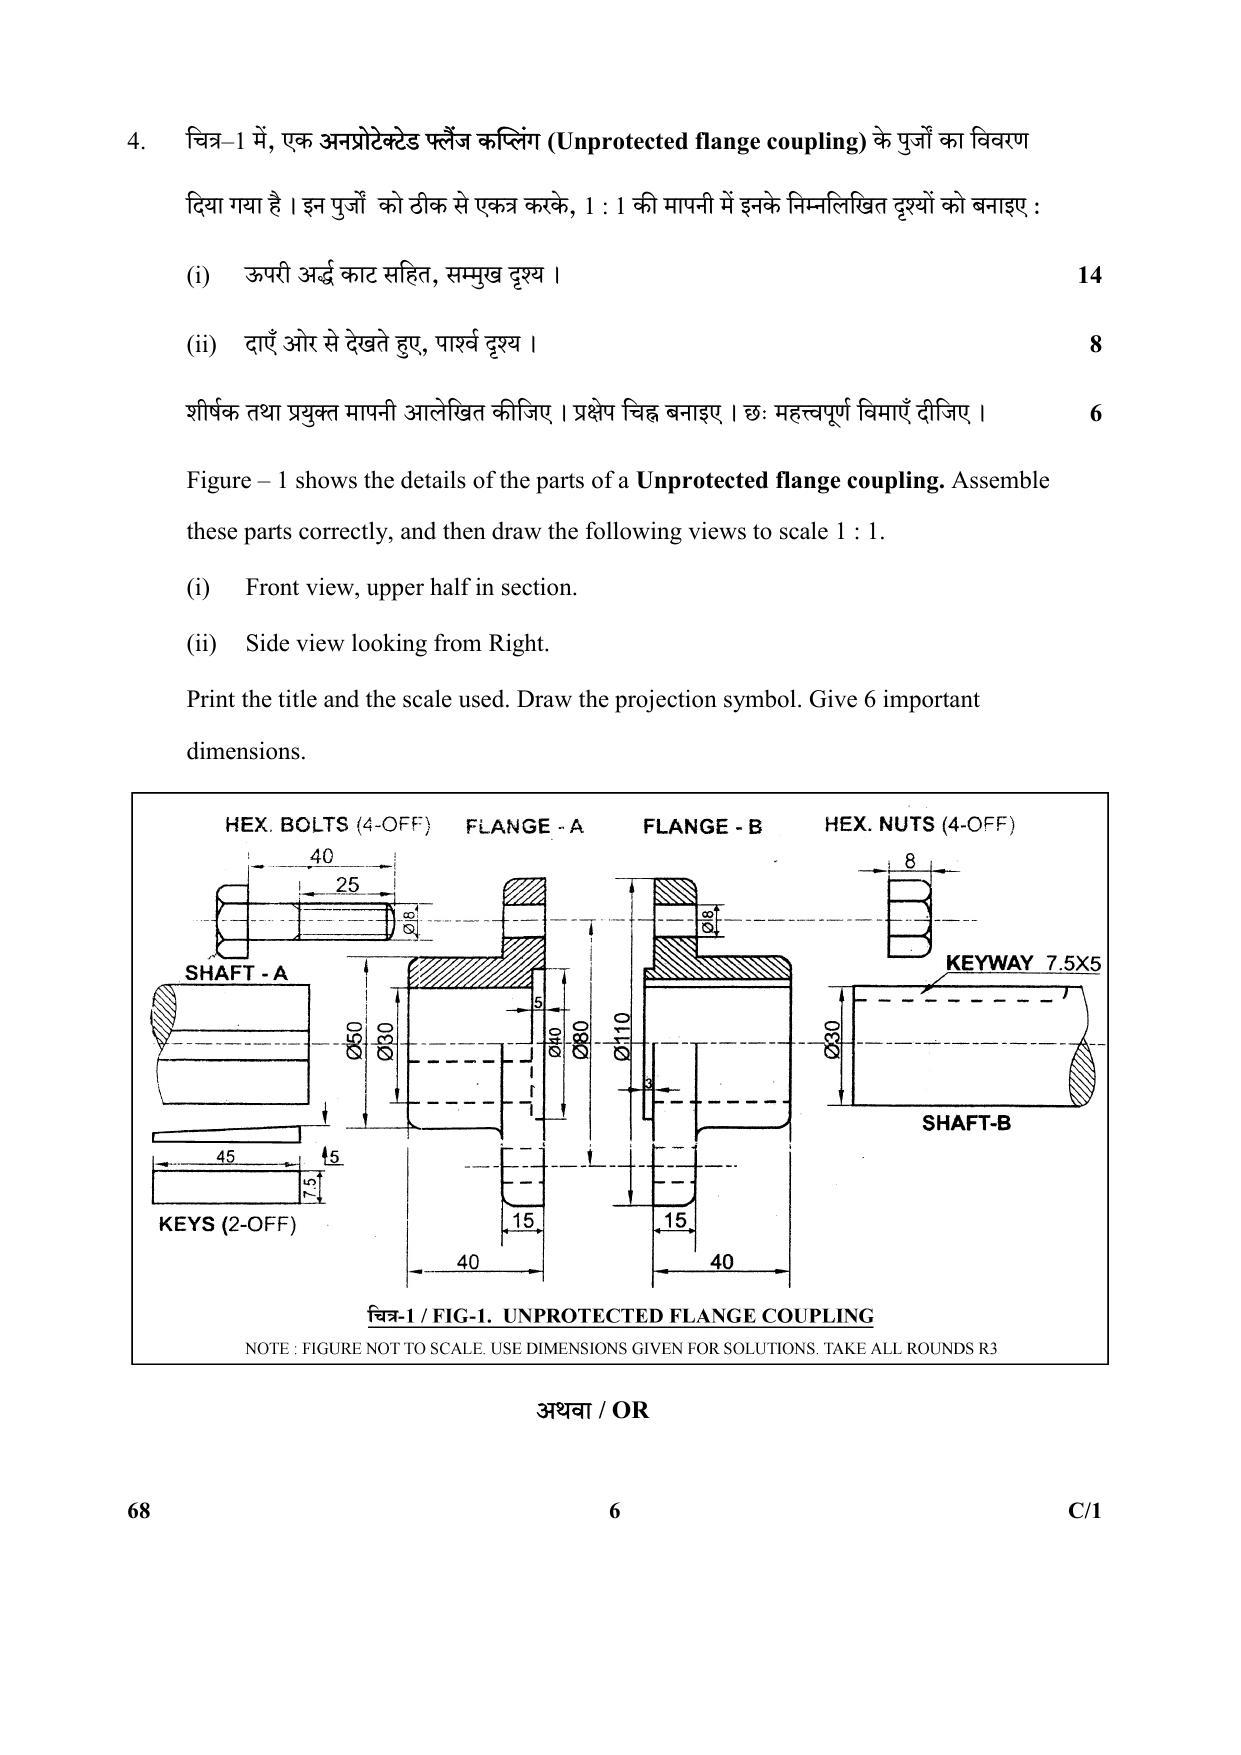 CBSE Class 12 68 (Engineering Graphics) 2018 Compartment Question Paper - Page 6